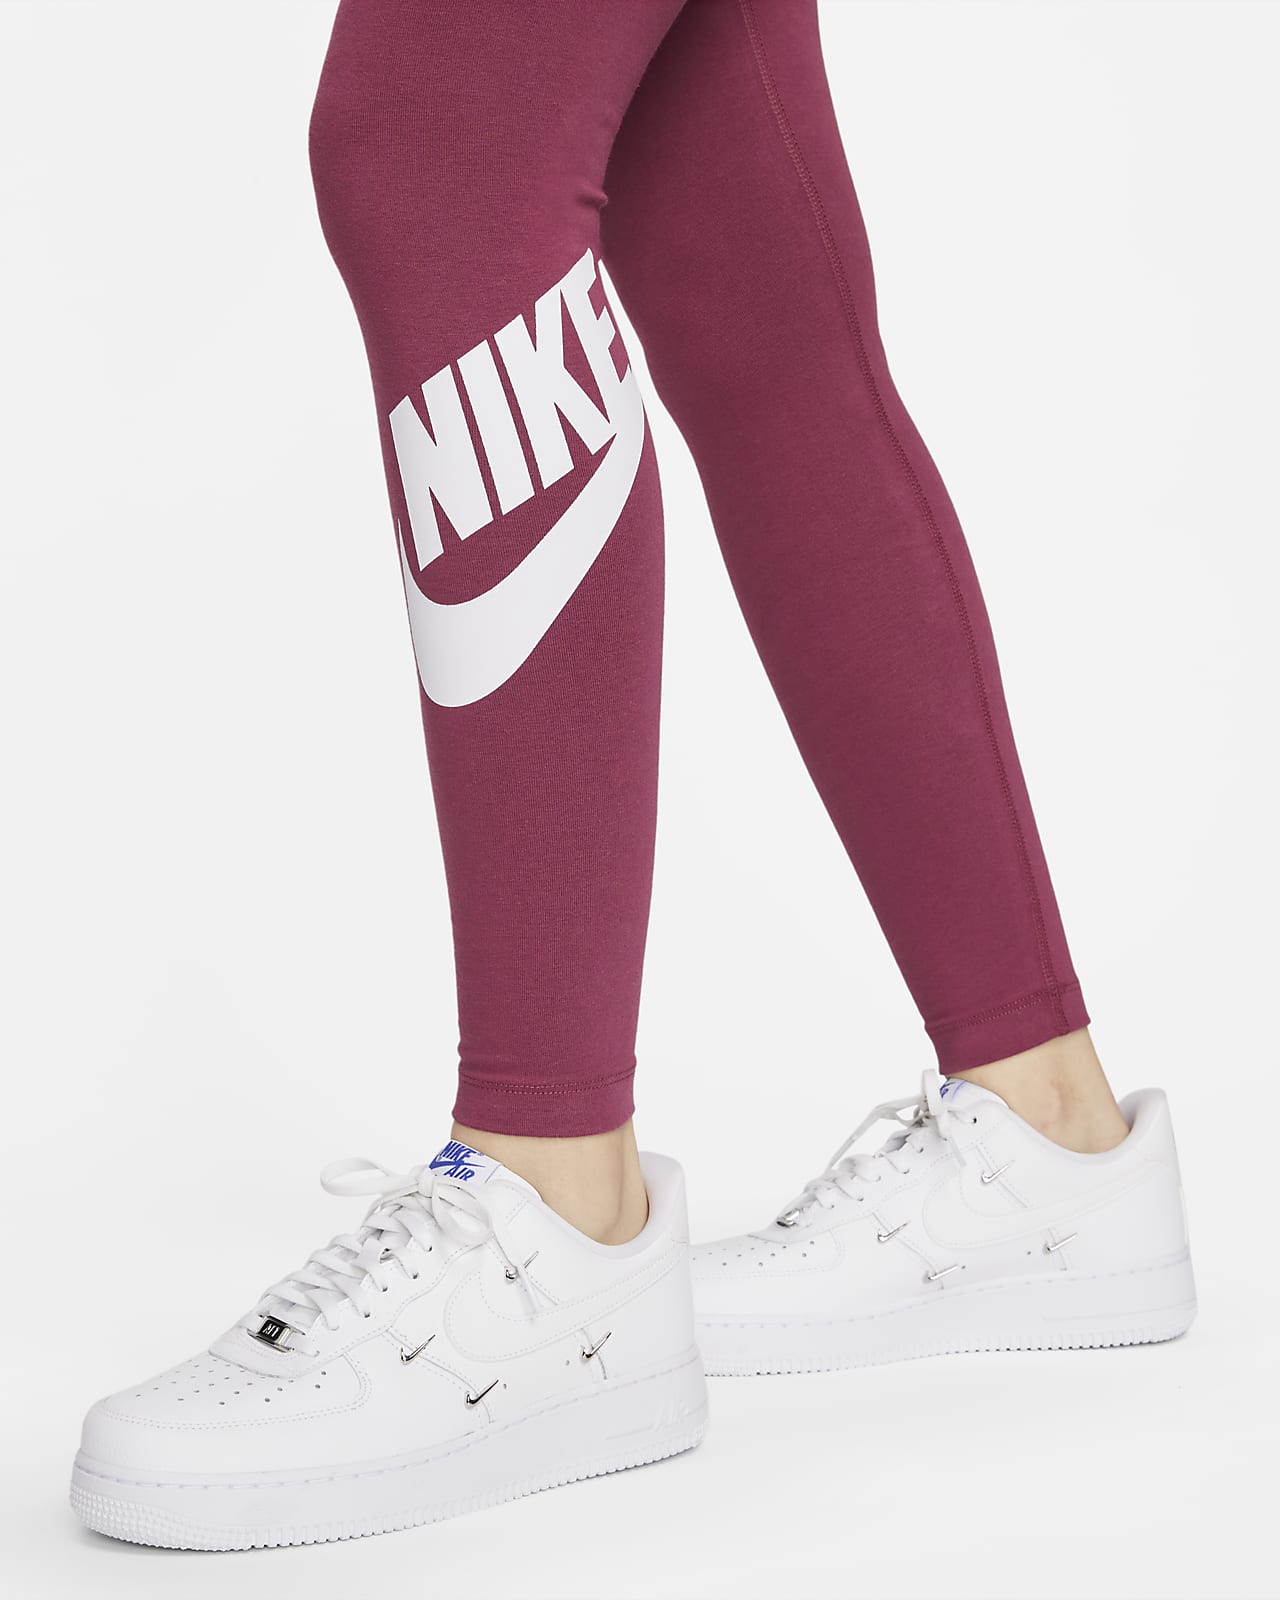 😱 Nike Women's Leggings are at Costco! I haven't seen Nike at